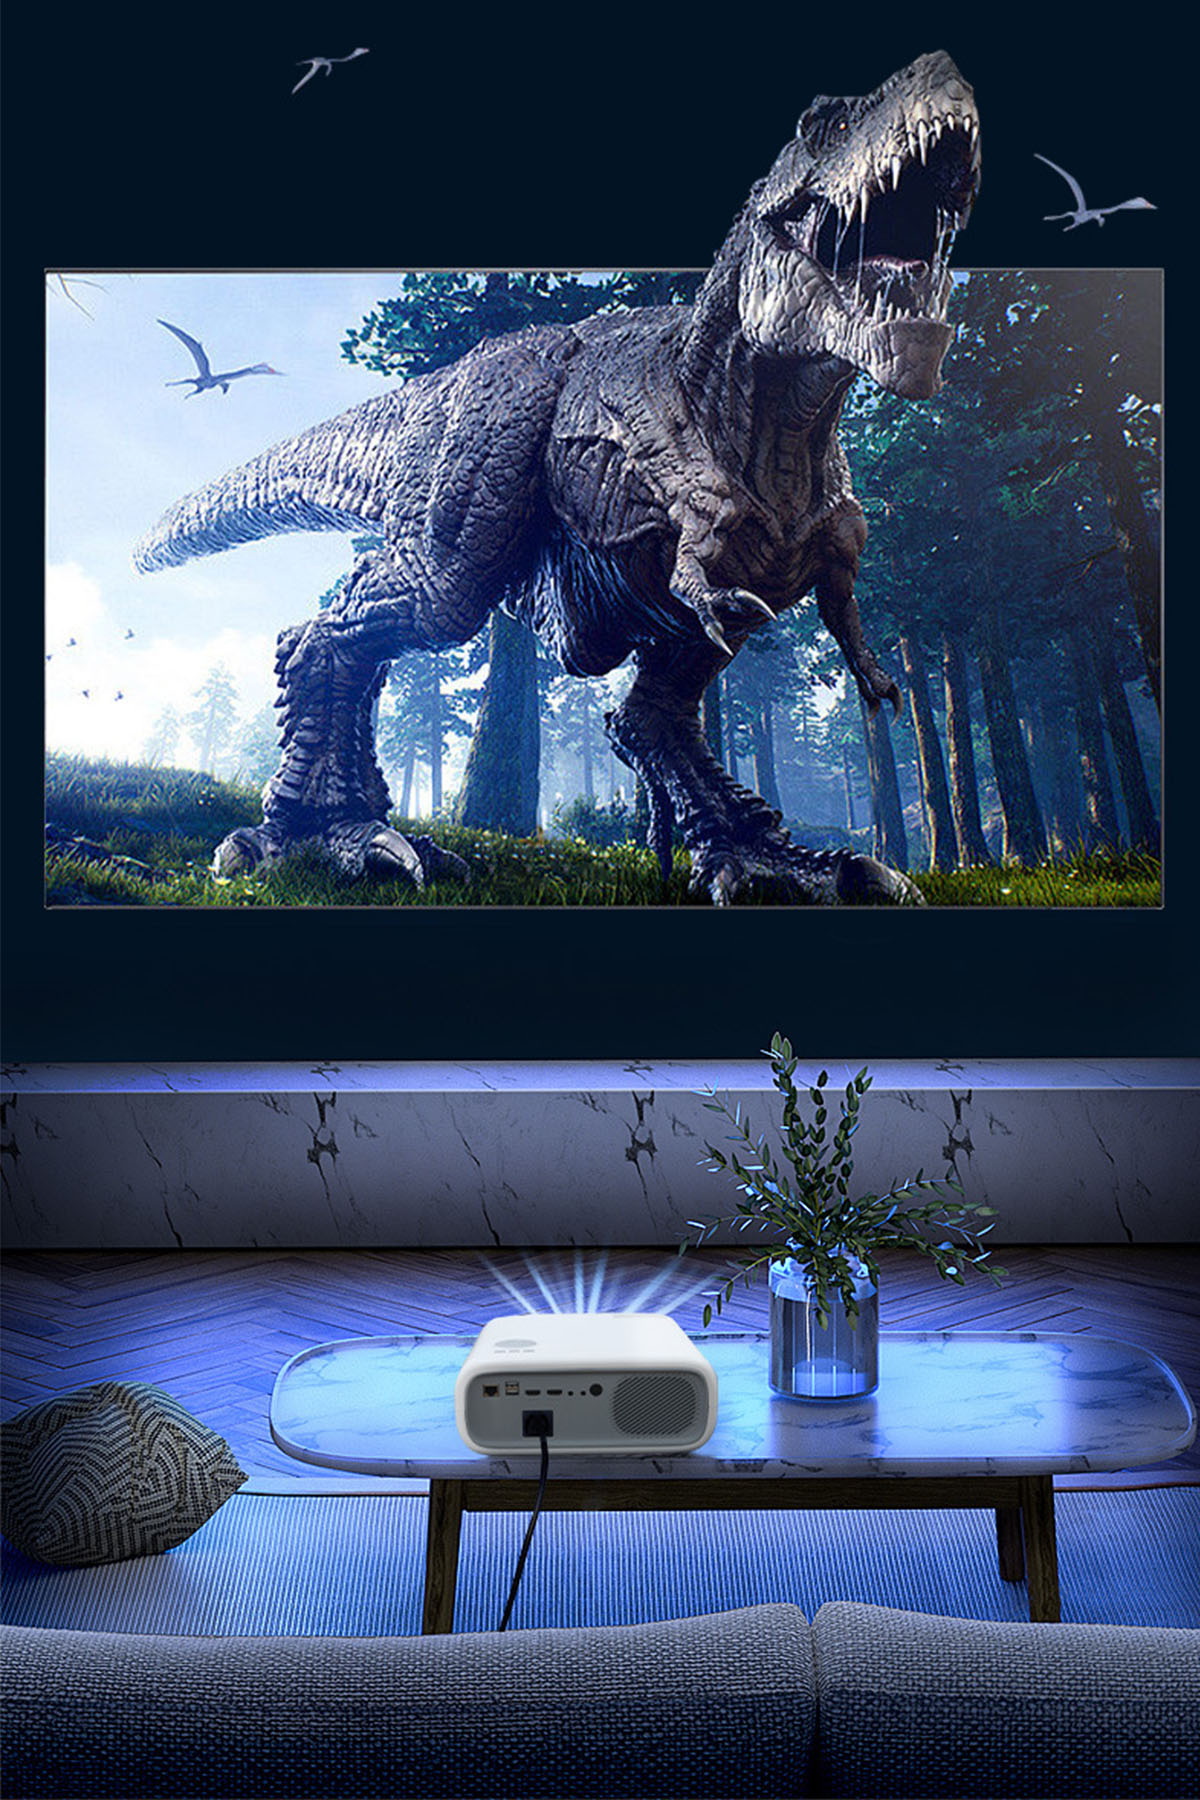 BRIGHTAKE 4K) Quality, 5GWIFI, Beamer(HDR Android 4K Projector HD Smart Voice | Control